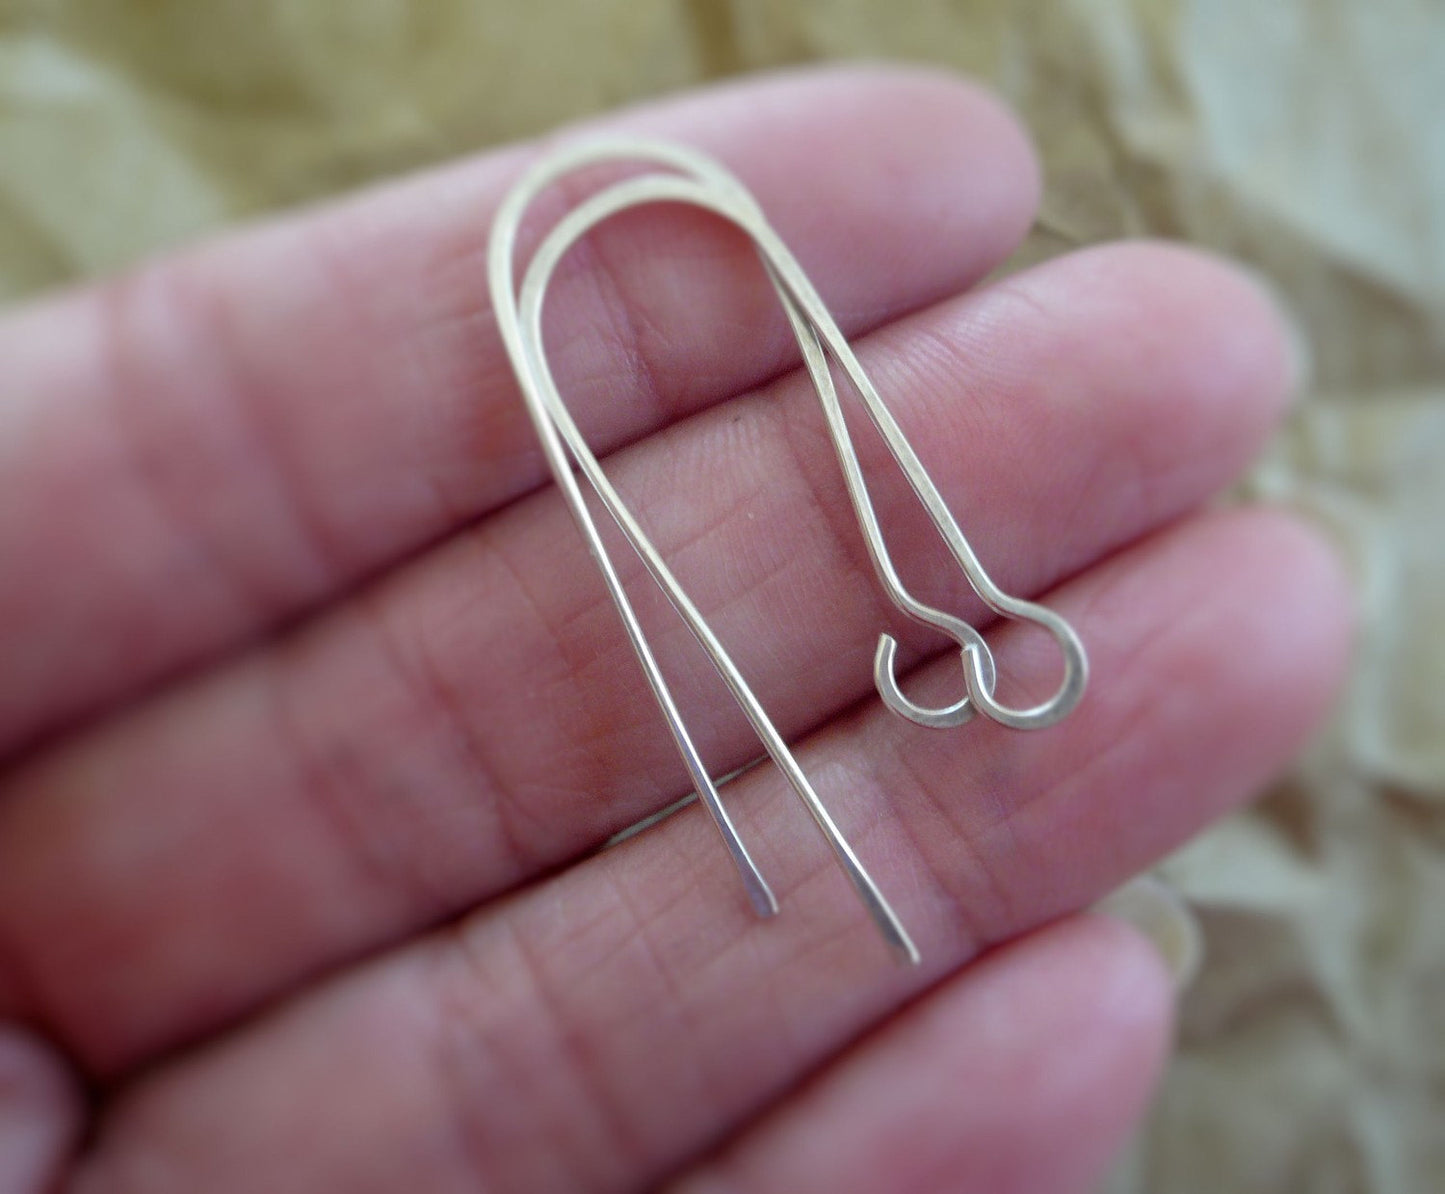 12 Pairs of my Minimalist Sterling Silver Earwires - Handmade. Handforged. Oxidized and Polished